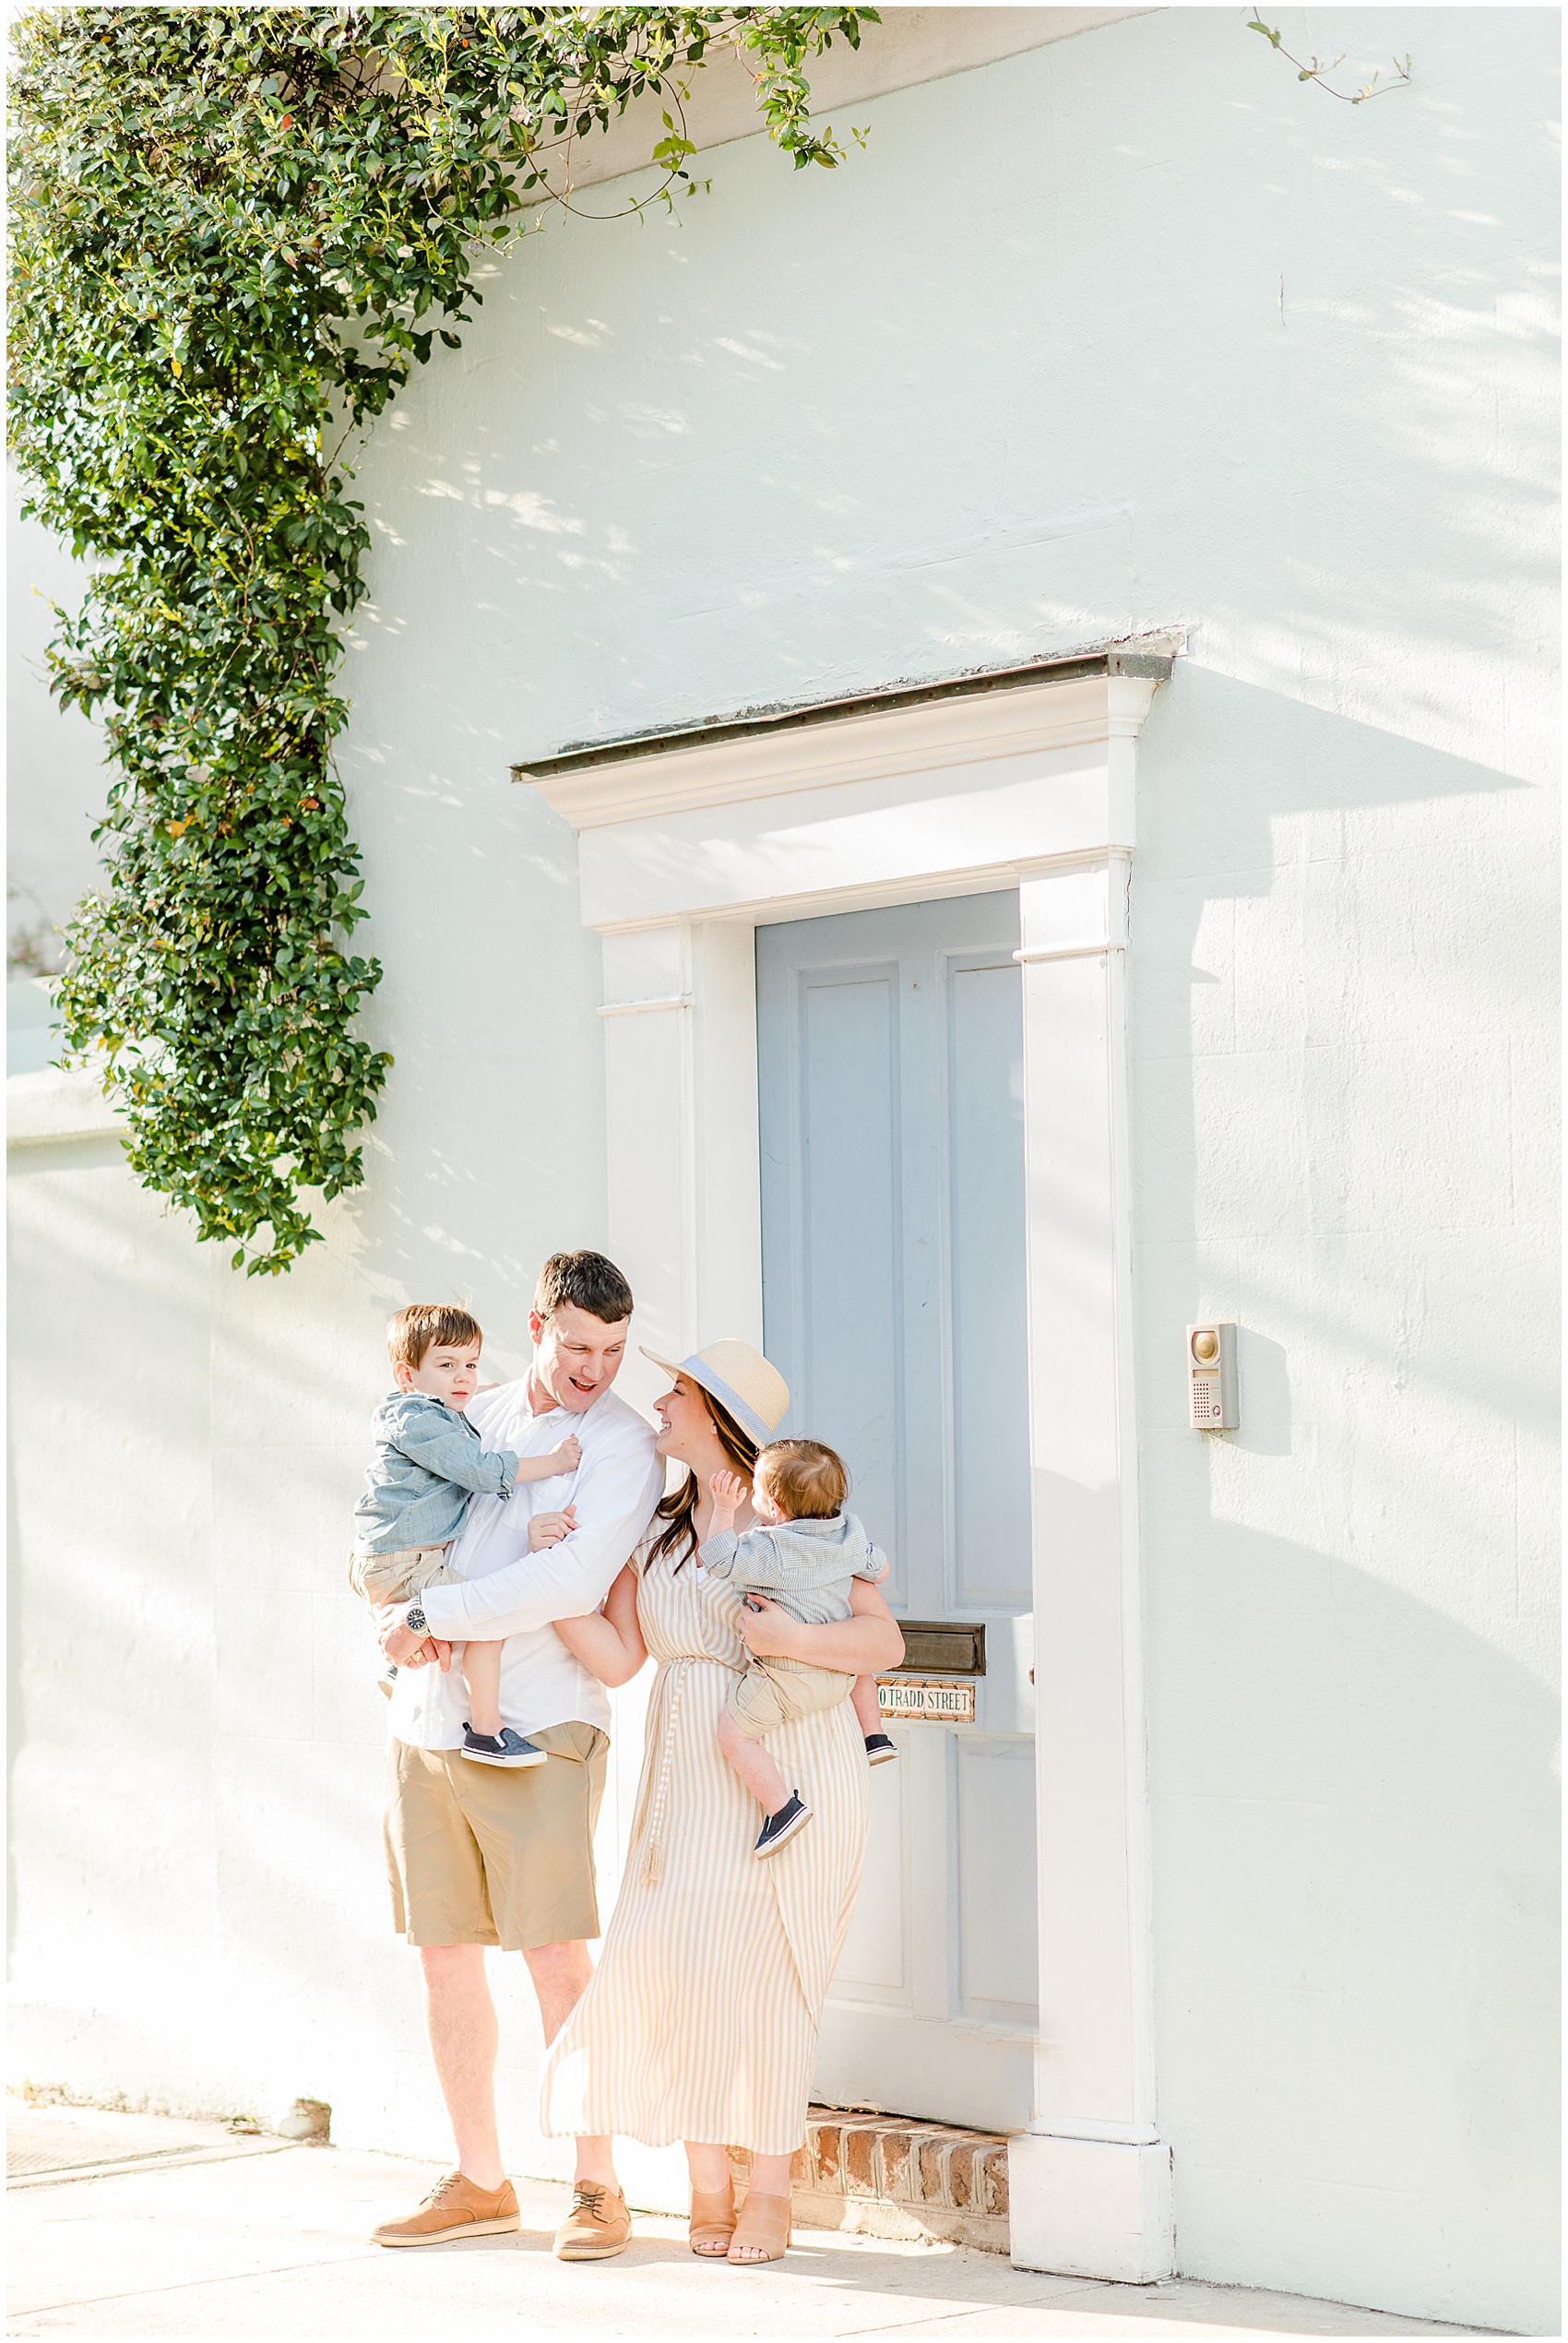 south of broad downtown Charlestion Folly Beach charleston wedding photographer session Lowcountry Charleston SC wedding Photographer_1987.jpg